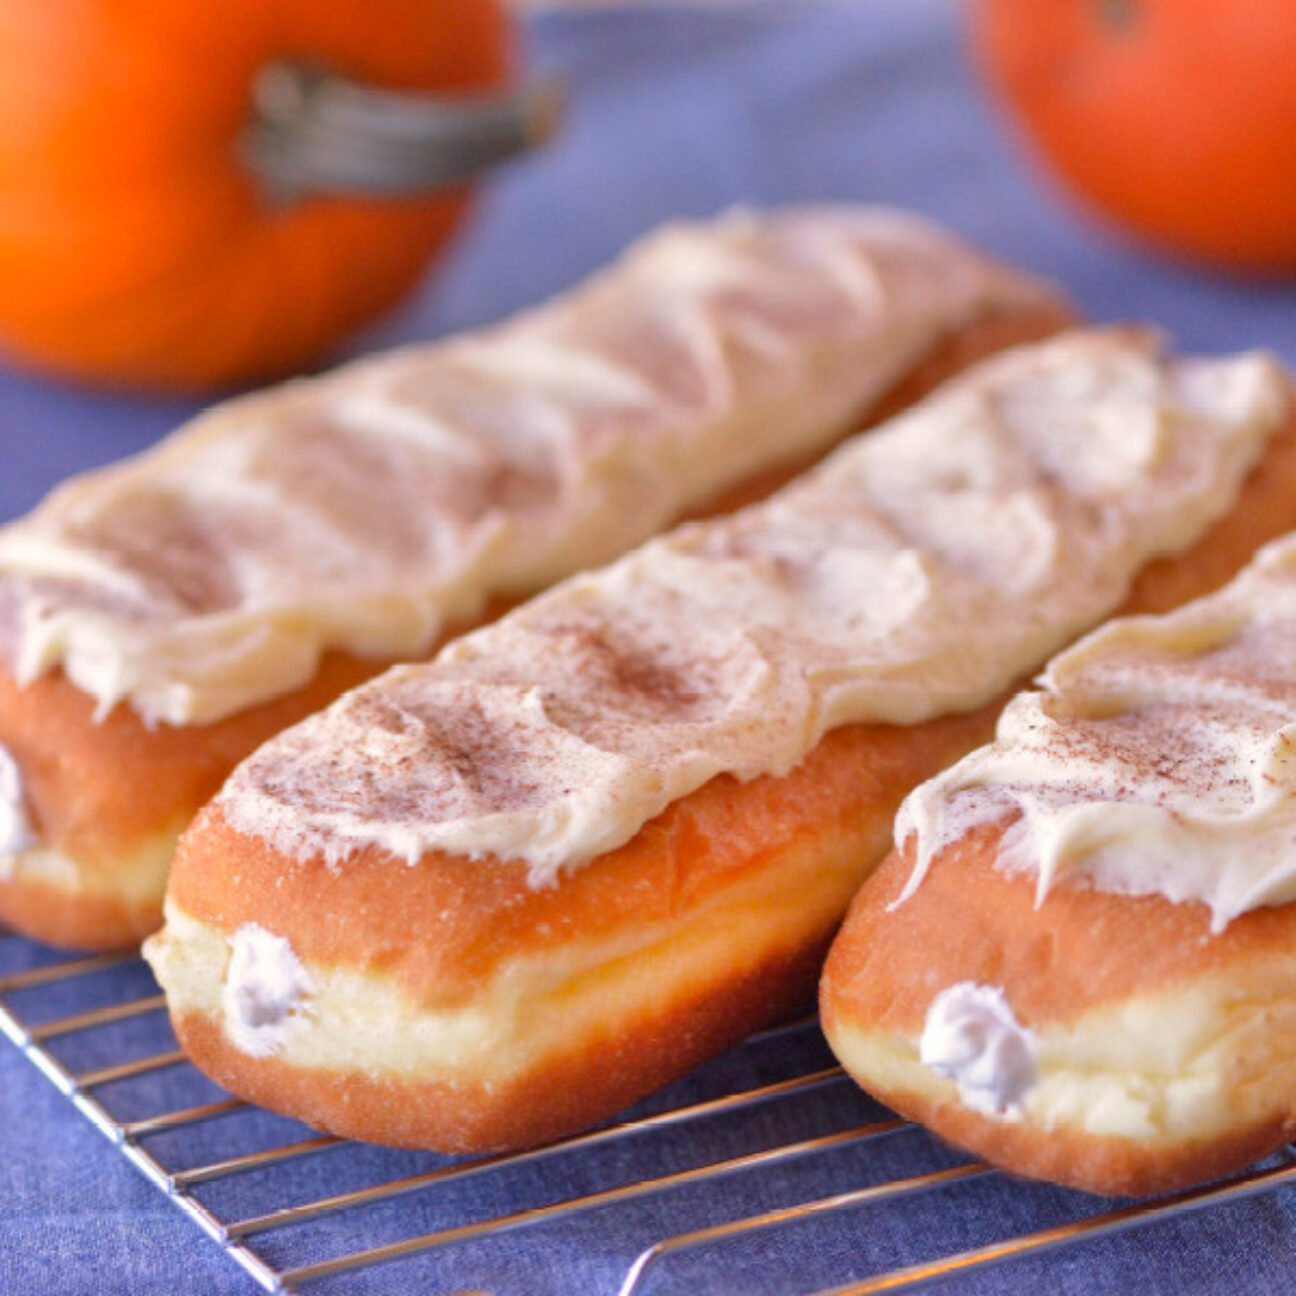 Special for the Fall season, enjoy the unique treat of our Pumpkin Long Johns!

One of the most popular items in our bakeries, our Amish creamsticks (also known as eclairs or long johns) are a rich decadent treat. At approximately seven inches long, our homemade creamsticks will dwarf most commercial bakeries' pastries. Our Pumpkin creamsticks (and all our bakery pastries) are fried in trans-fat free soybean oil then filled liberally with a mild fluffy pumpkin cream. Frosted with Pumpkin-flavored icing. Baked and shipped from Ohio's Amish Country.

Comes as a half-dozen creamsticks and will ship un-iced for easier transit. Frosting will come packaged separately.